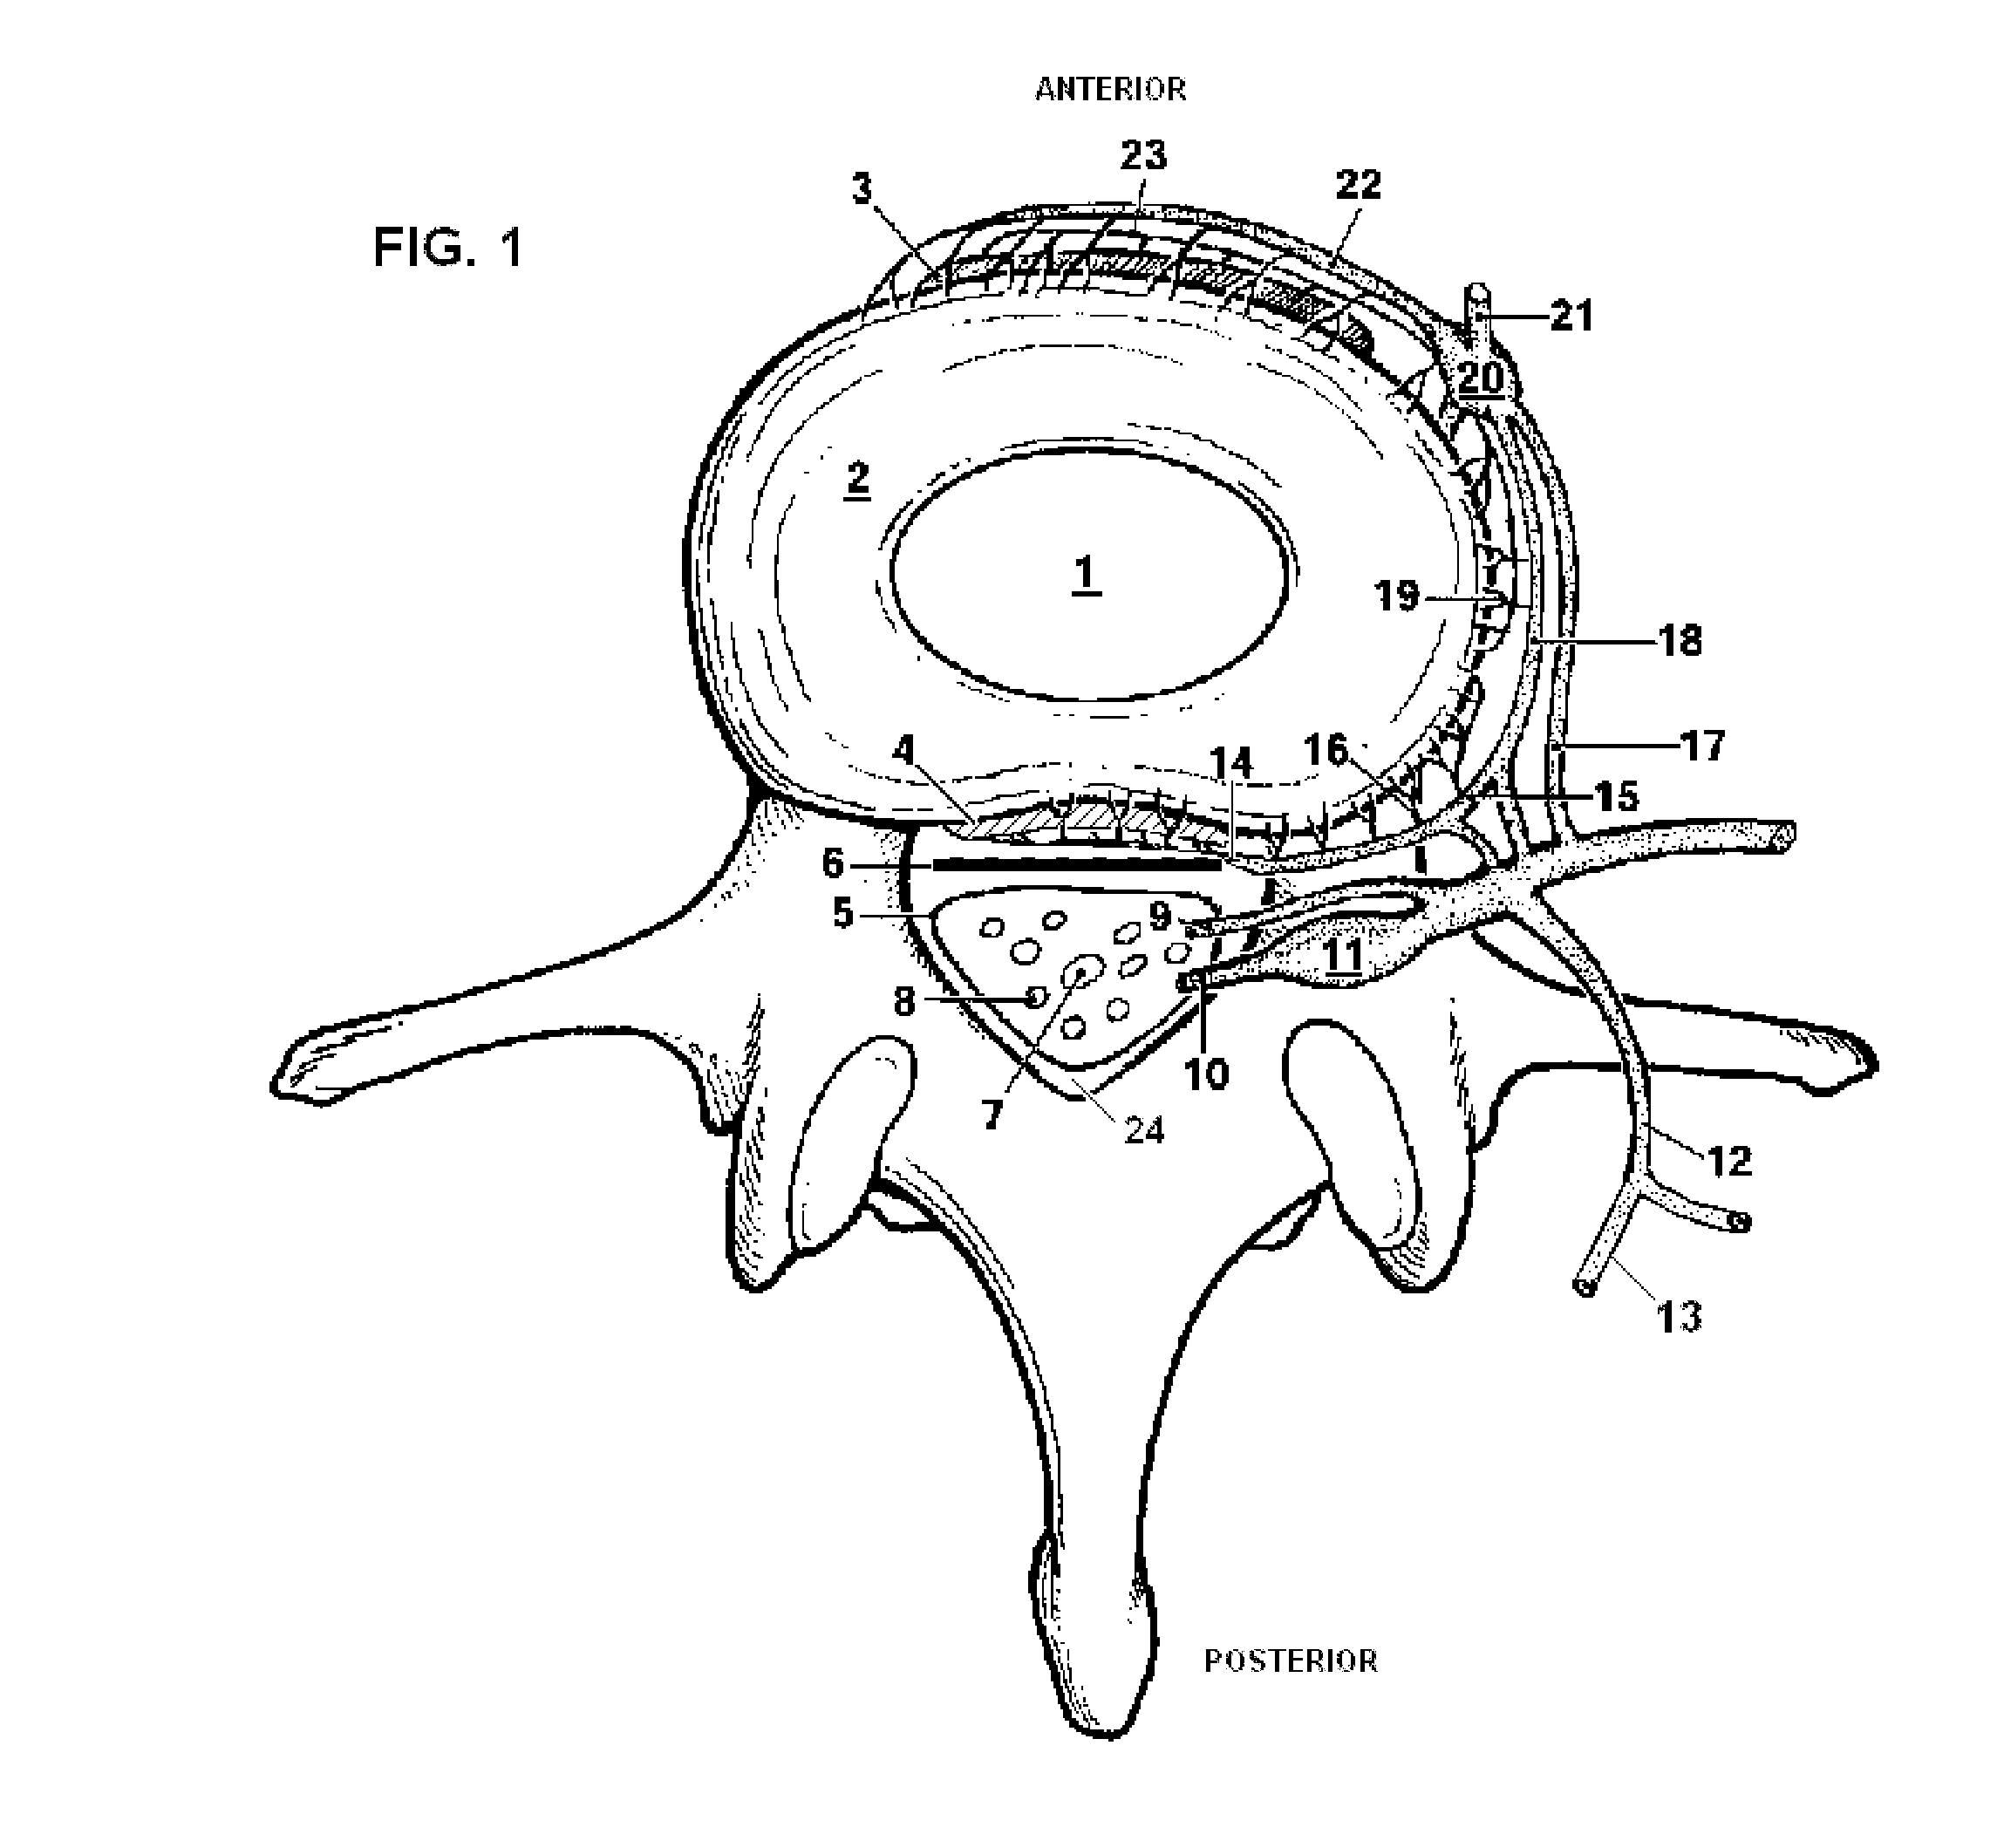 System and Methods for Diagnosis and Treatment of Discogenic Lower Back Pain